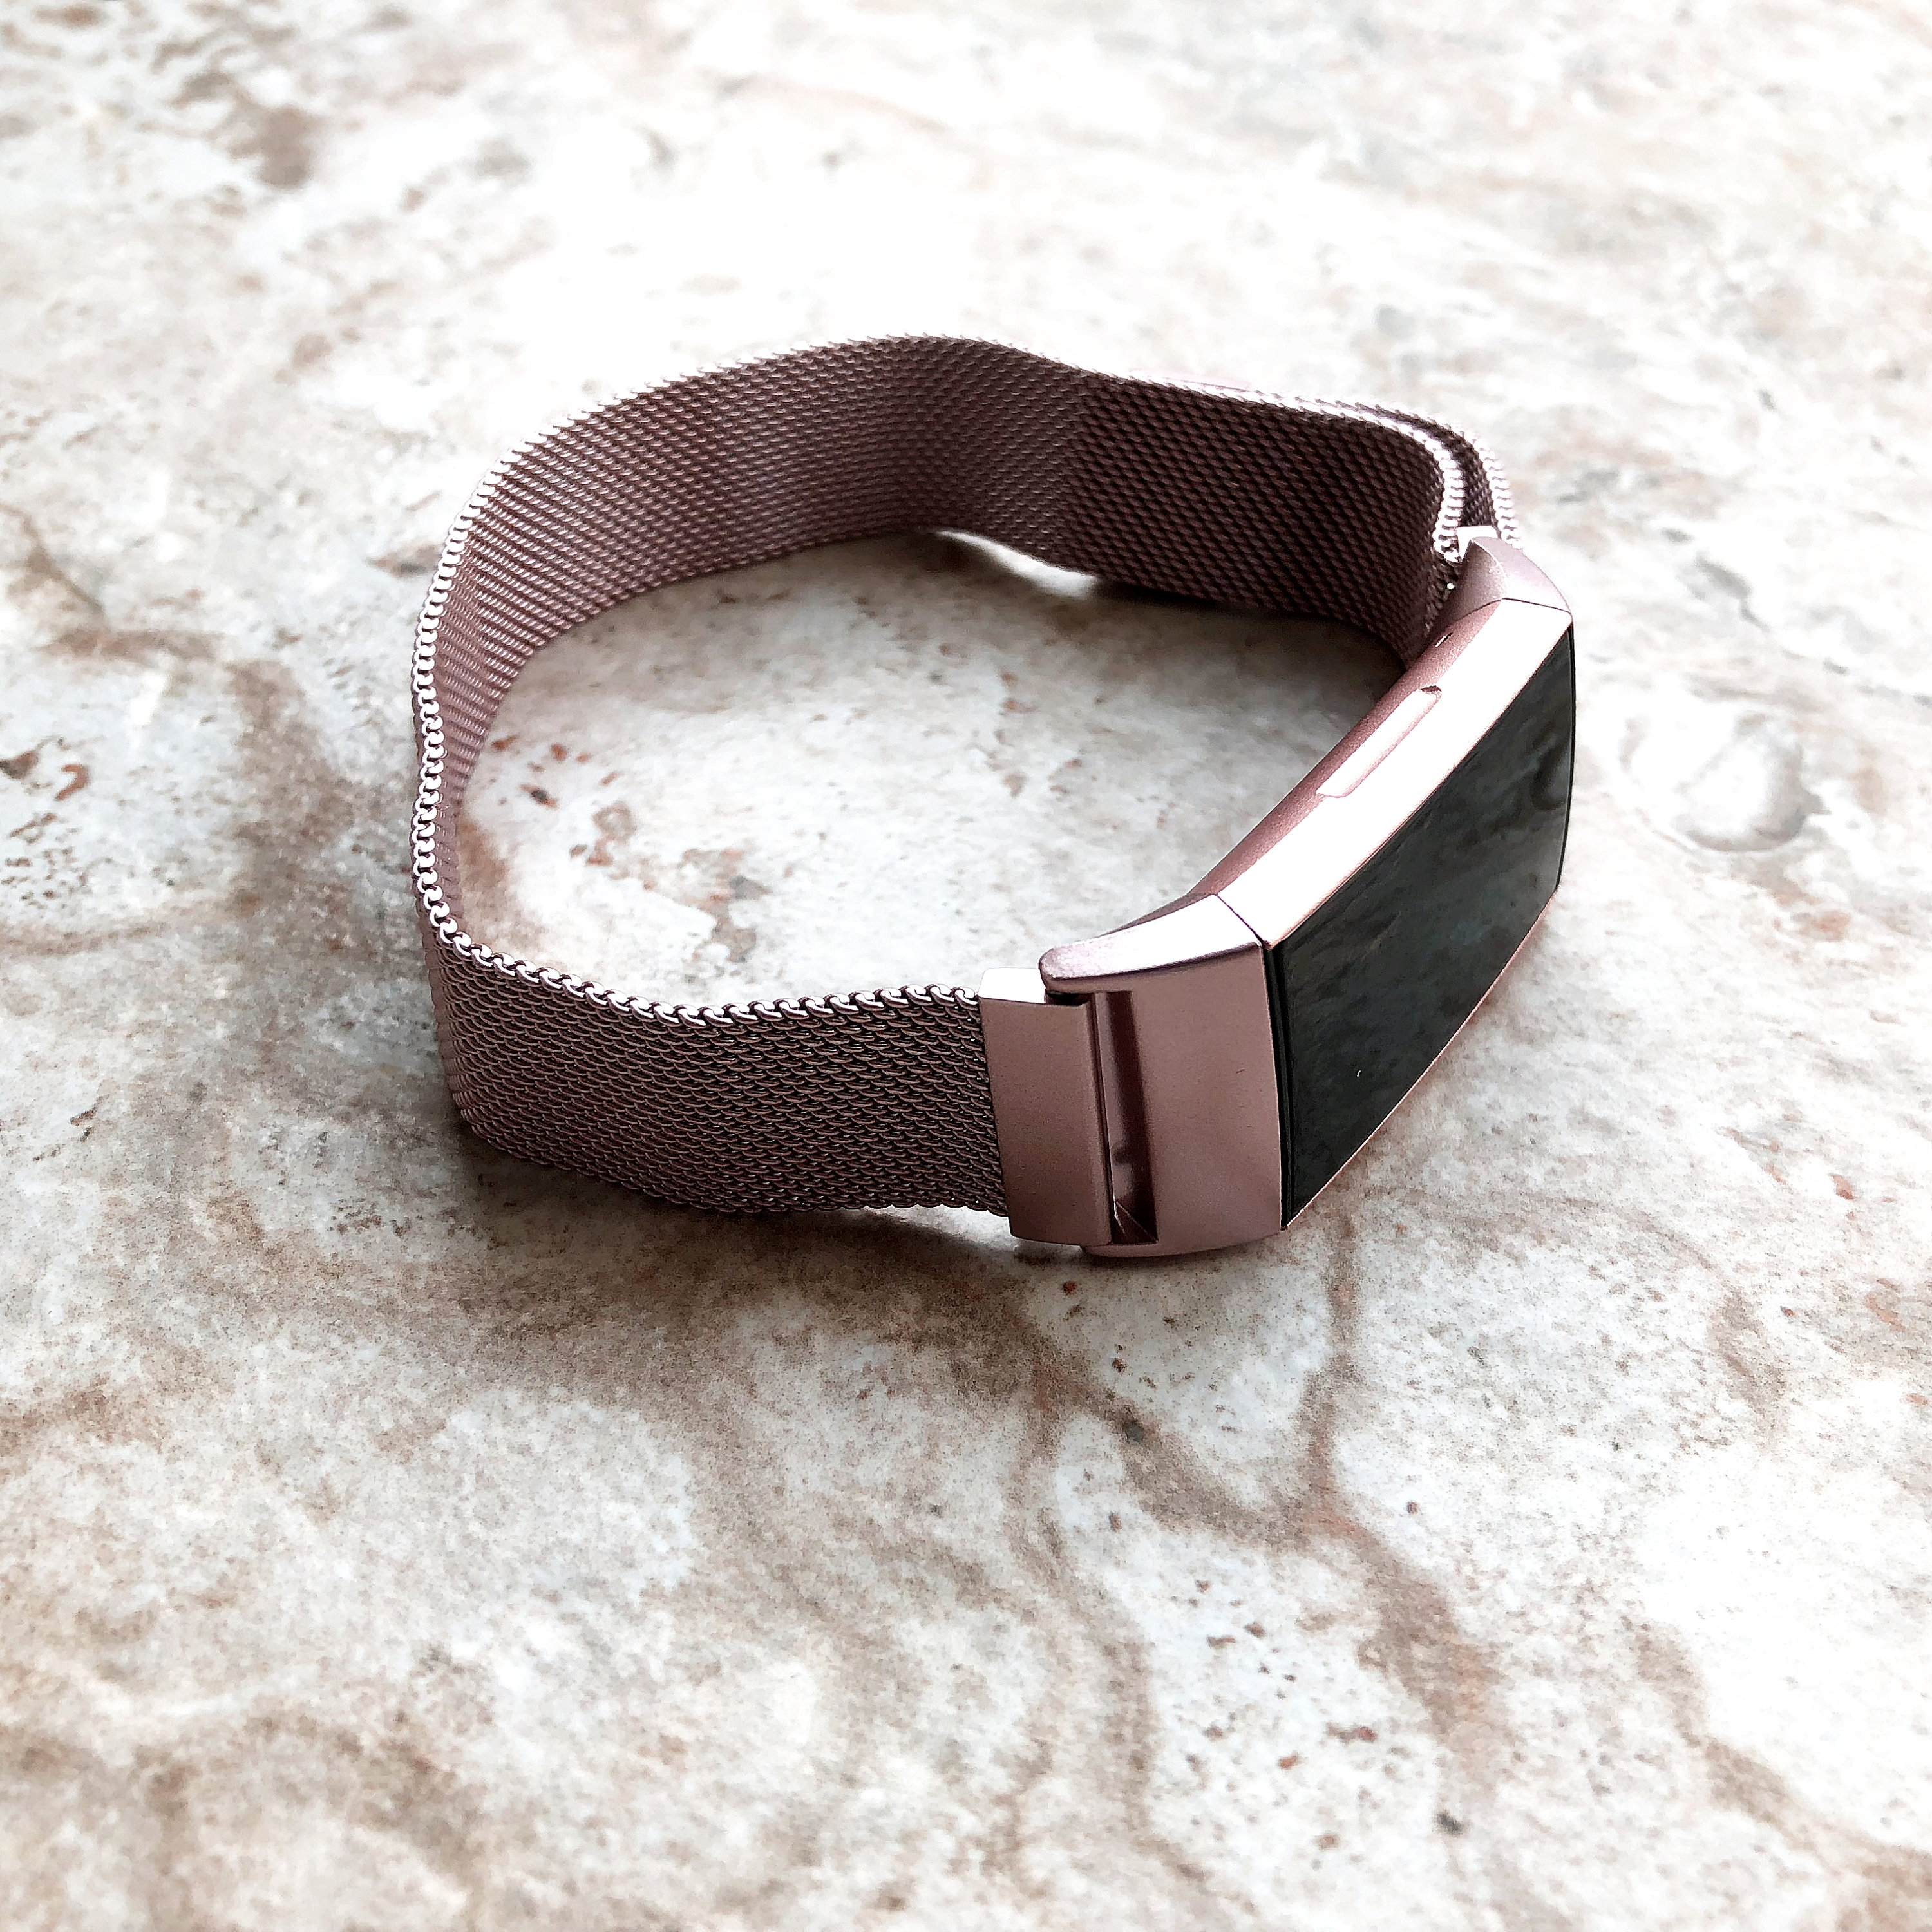 rose gold strap for fitbit charge 3